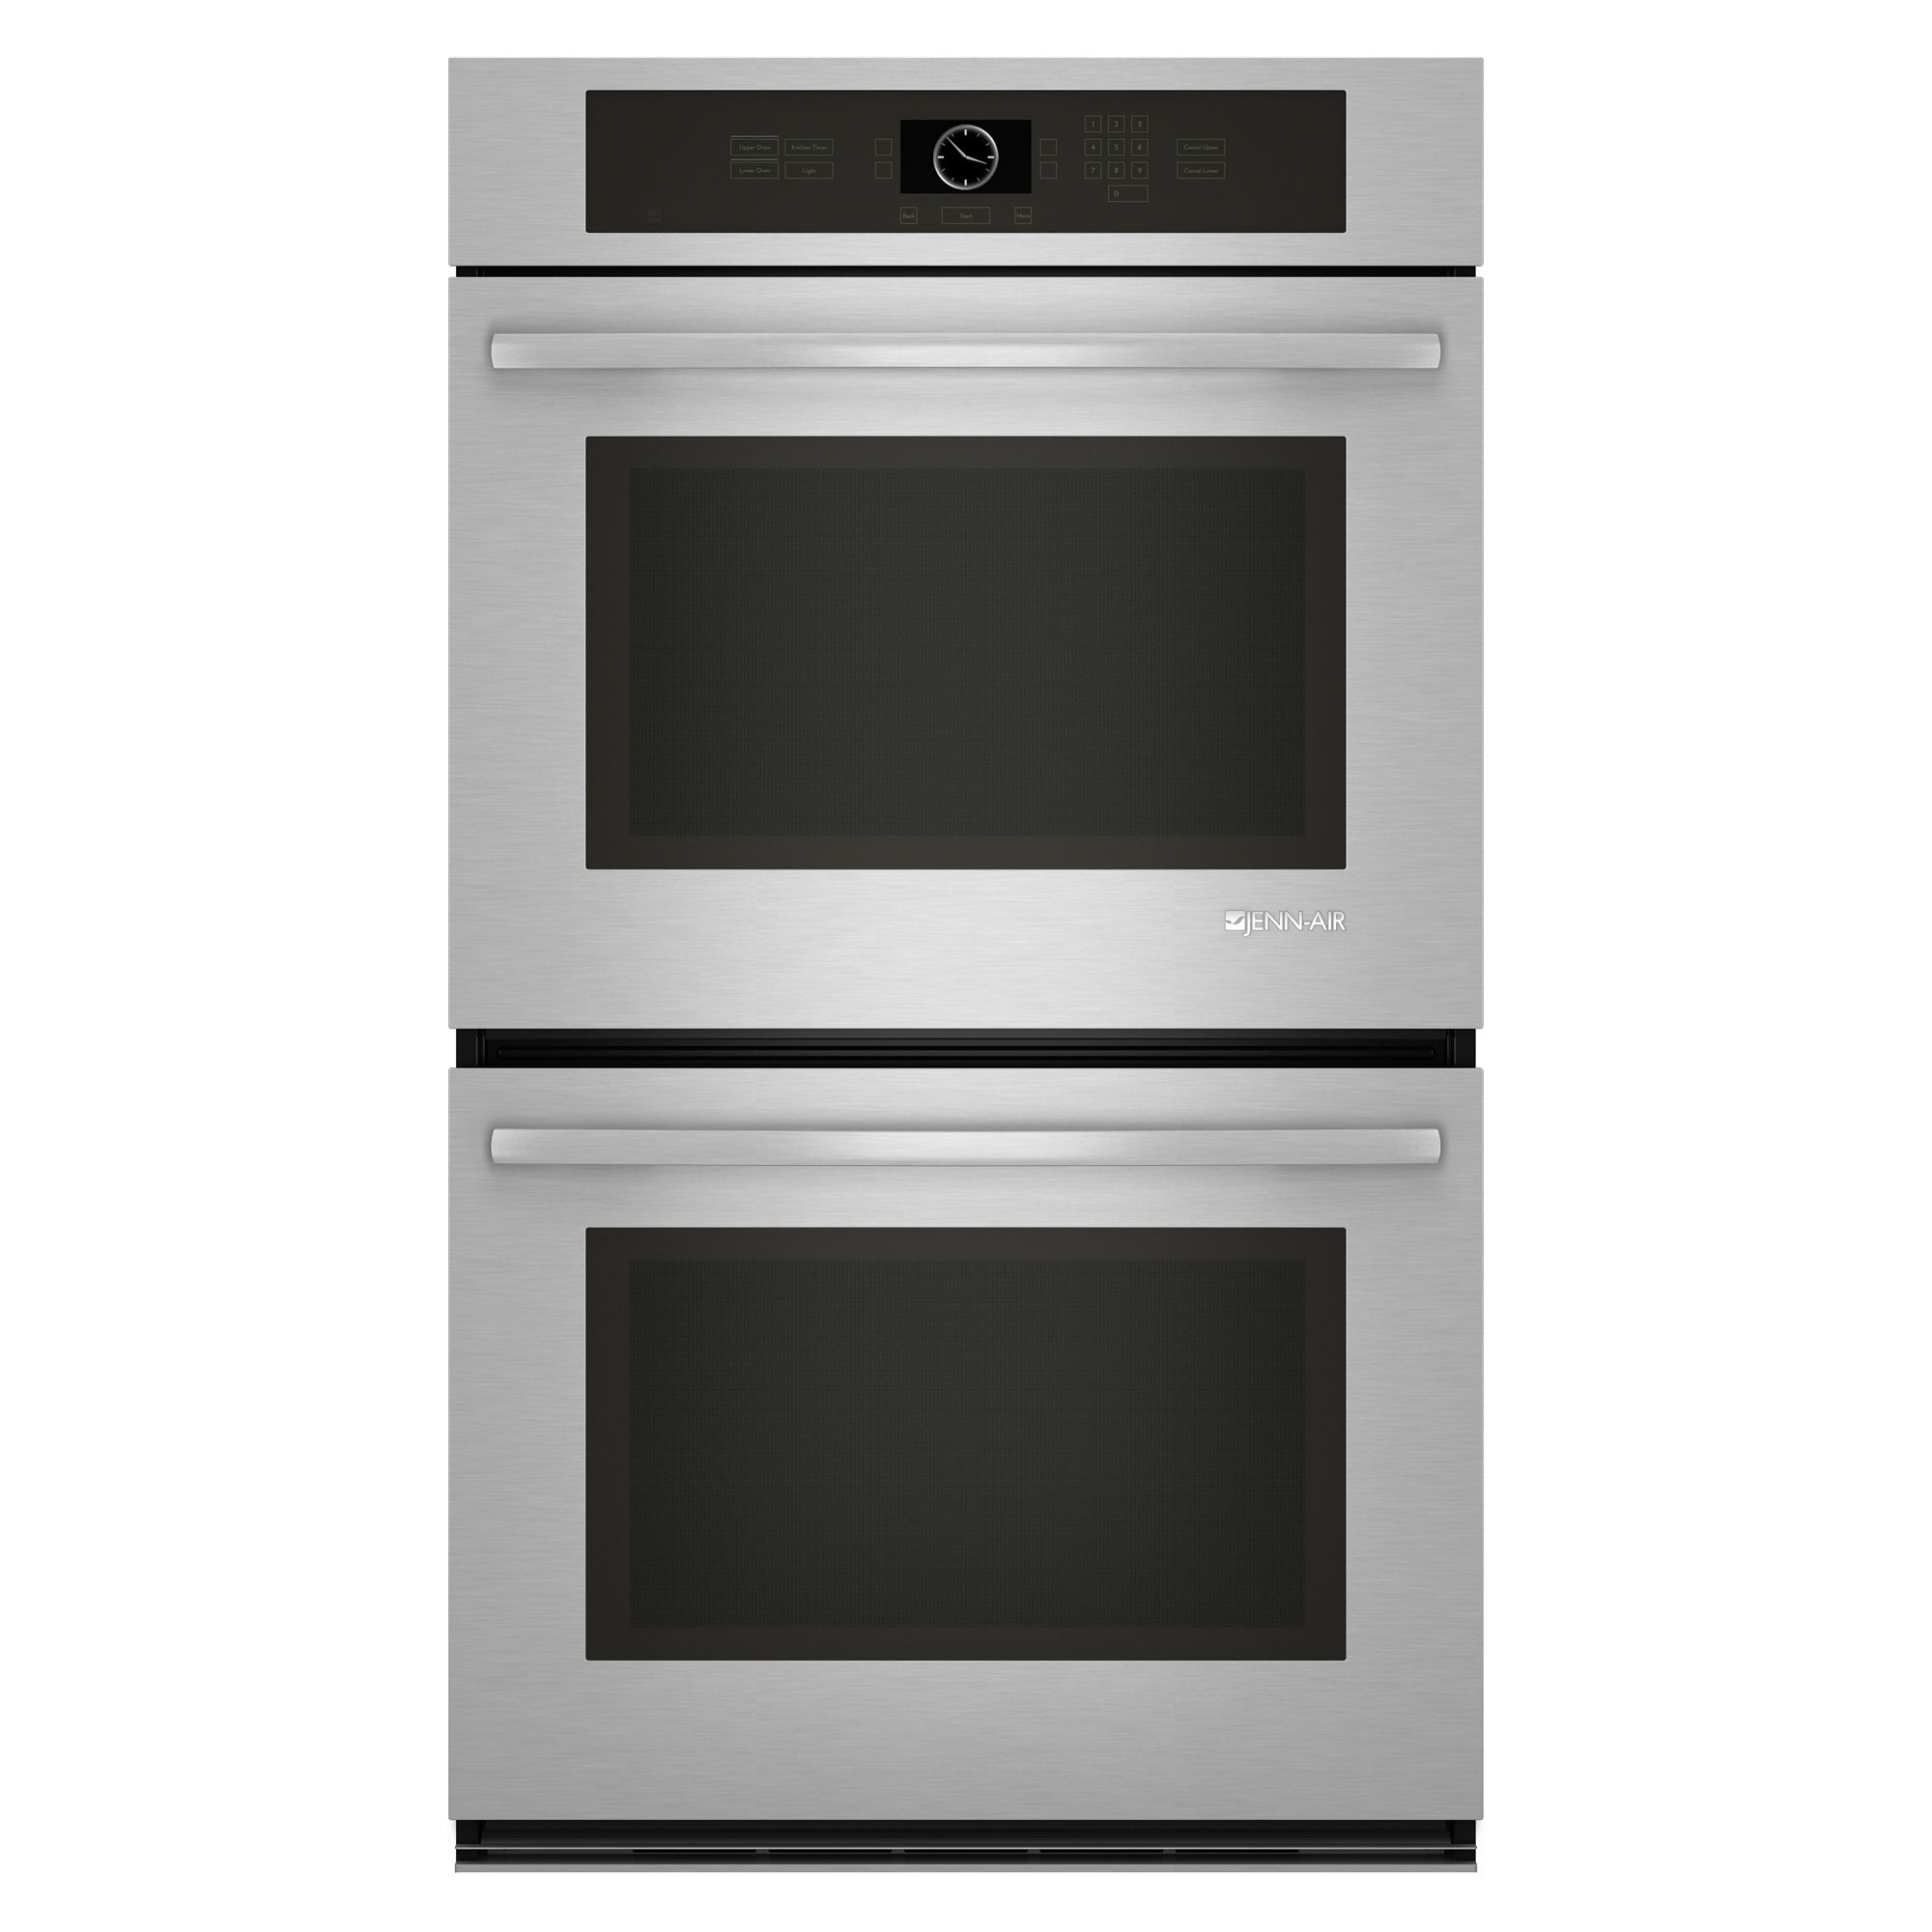 30" Electric Built-In Double Wall Oven logo